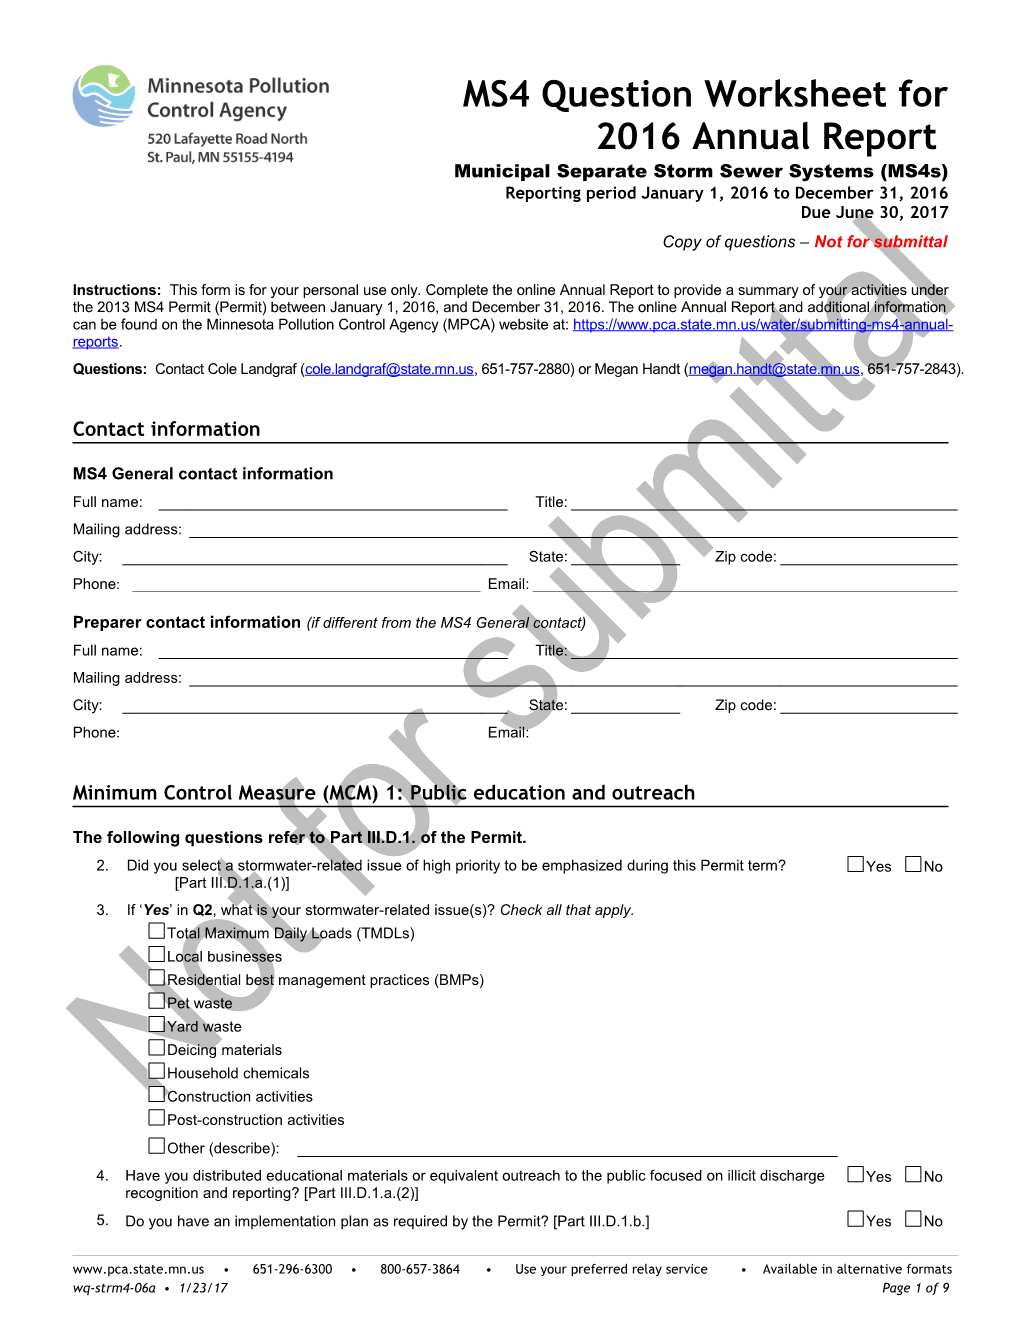 MS4 Question Worksheet for Annual Report - Form